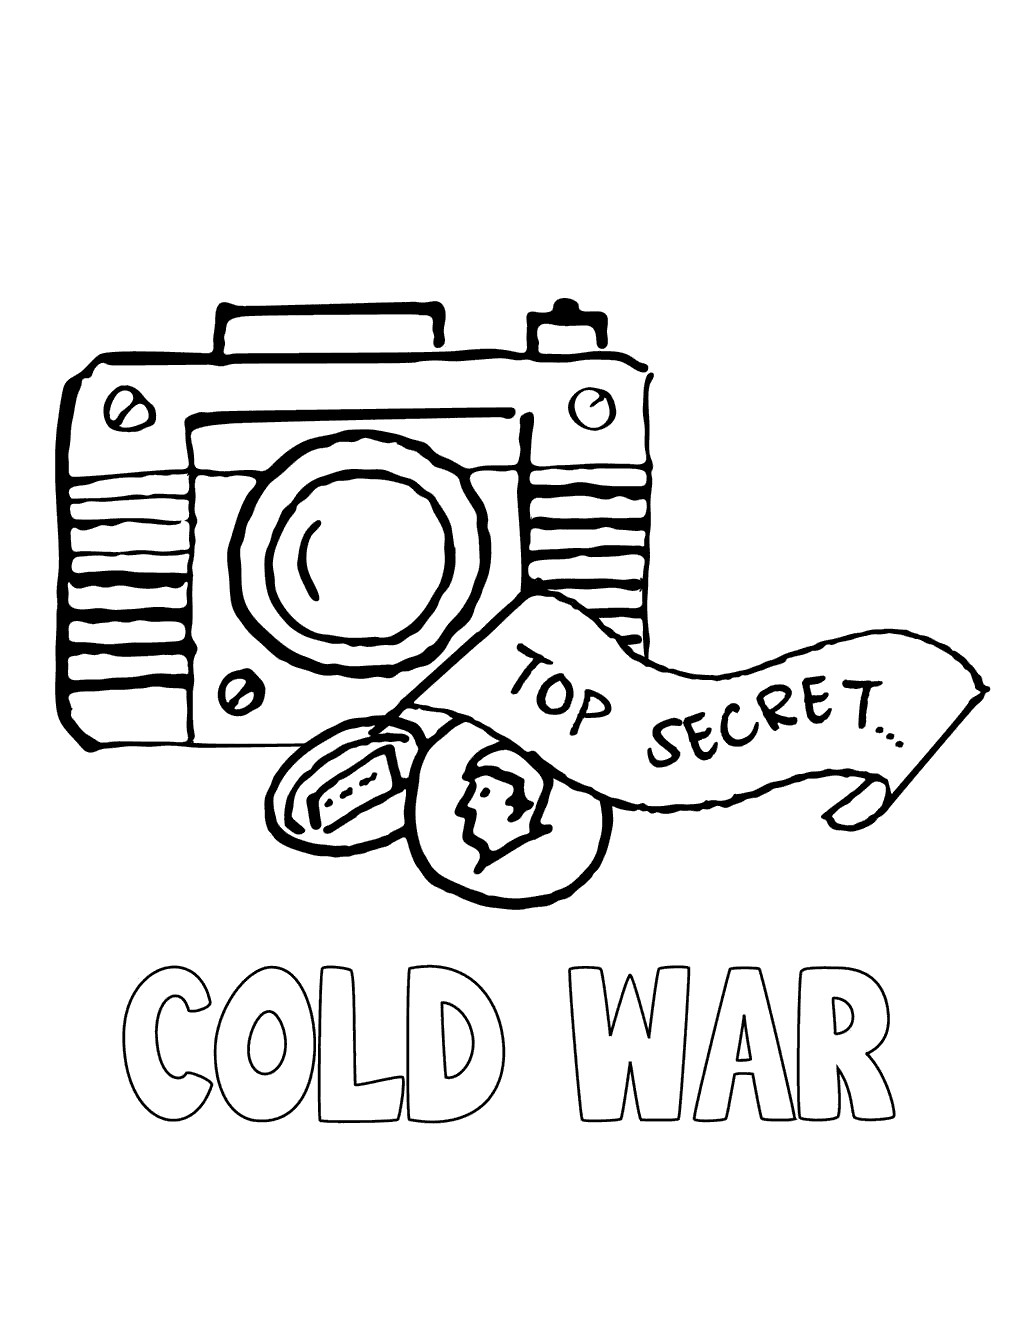 Free Constitution Coloring Pages Cold War printable